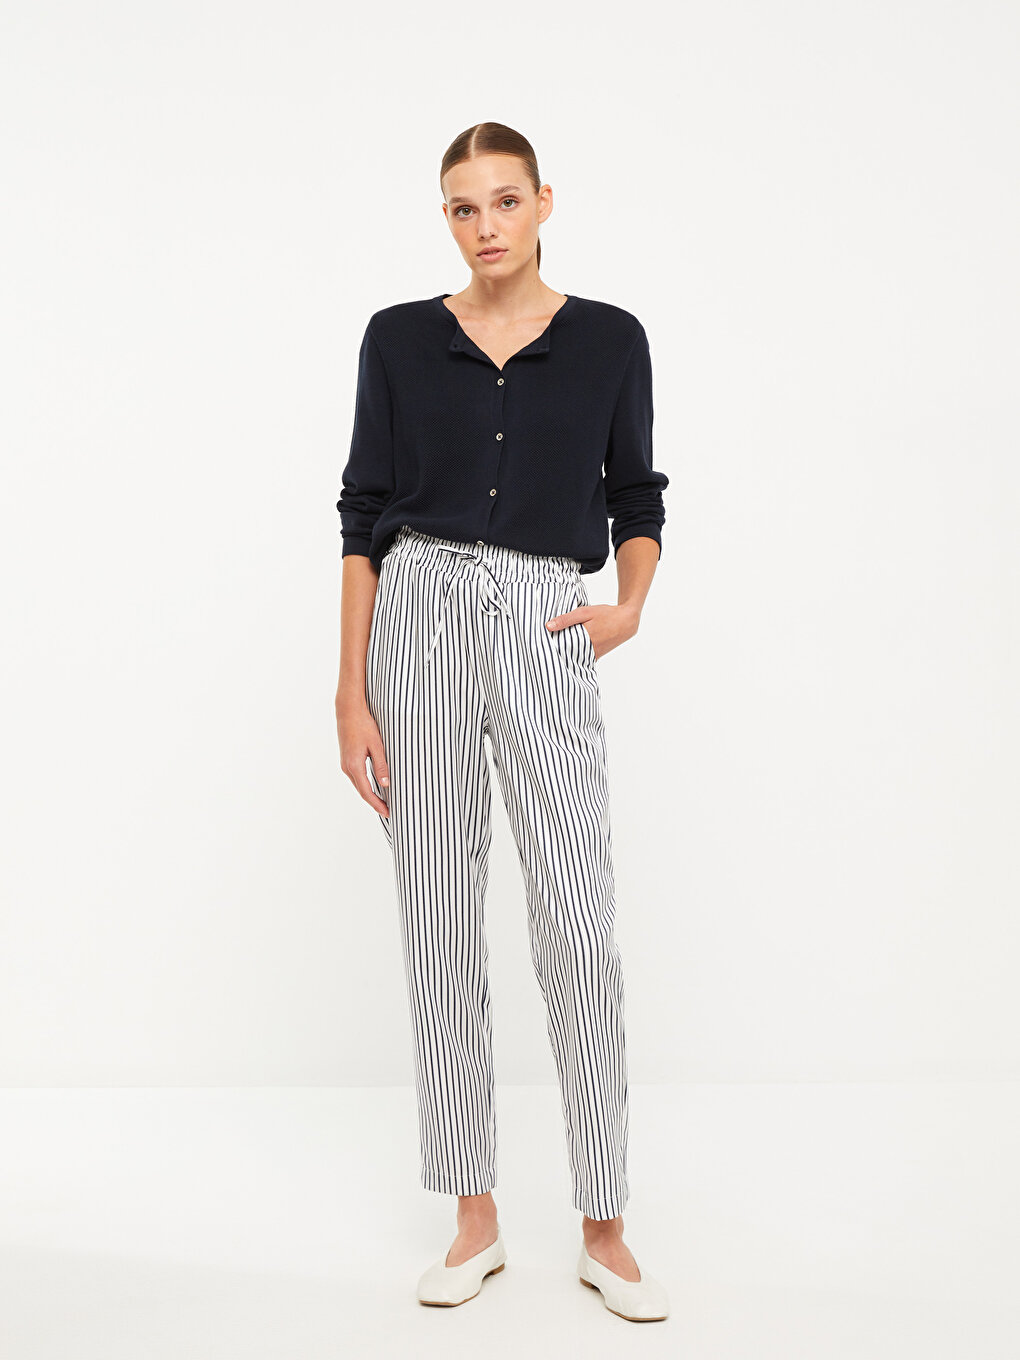 Black Striped Trousers – EthicalRoots-anthinhphatland.vn